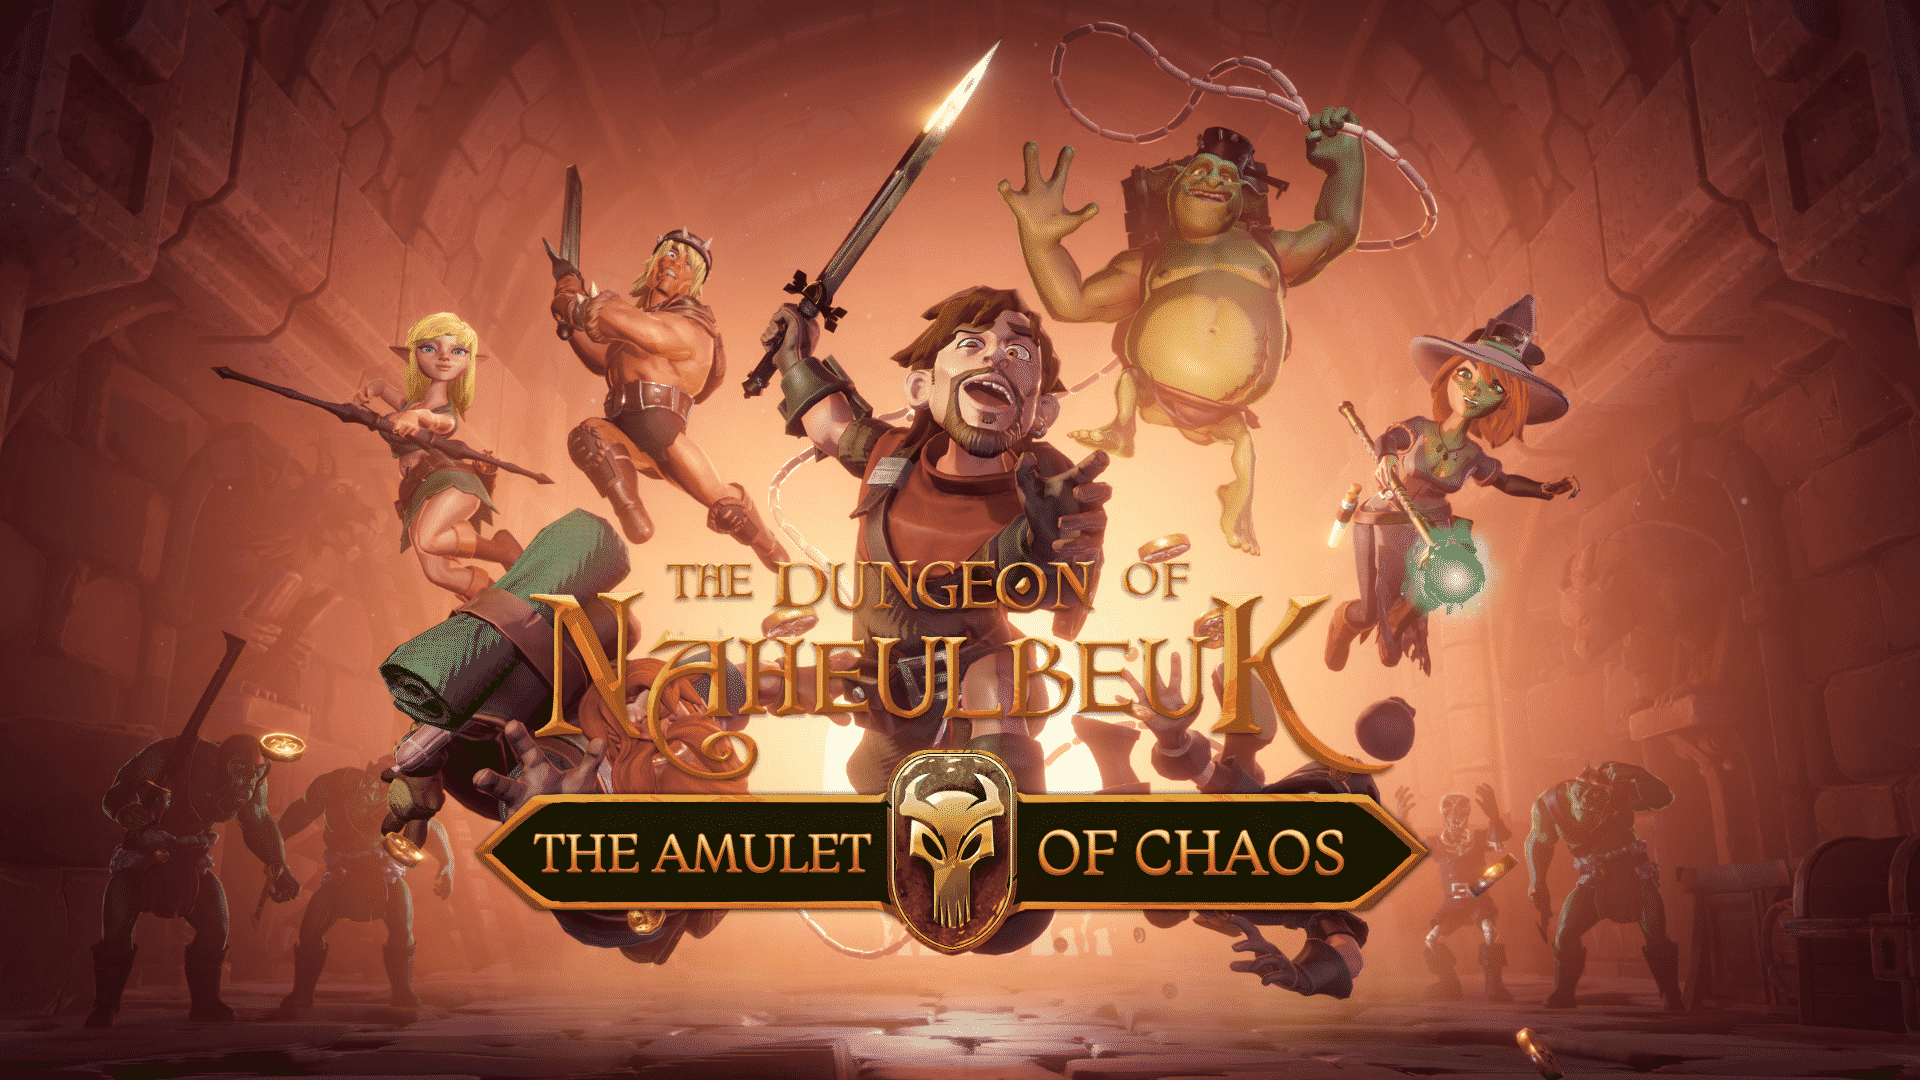 the dungeon of naheulbeuk the amulet of chaos xbox